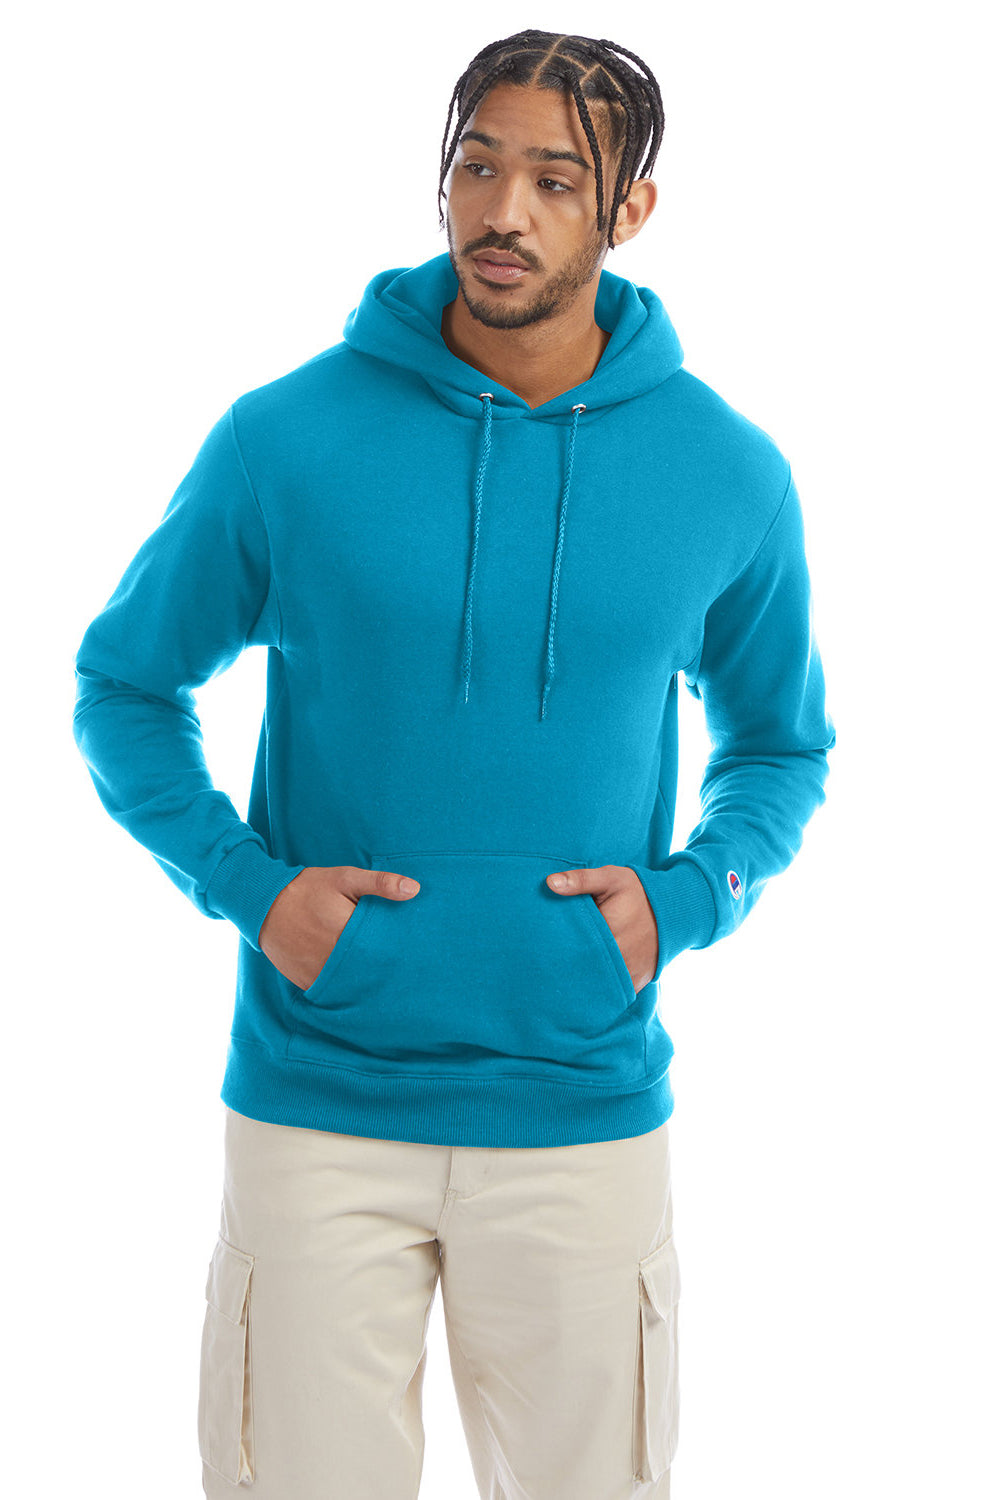 Champion S700 Mens Double Dry Eco Moisture Wicking Fleece Hooded Sweatshirt Hoodie Tempo Teal Blue Front